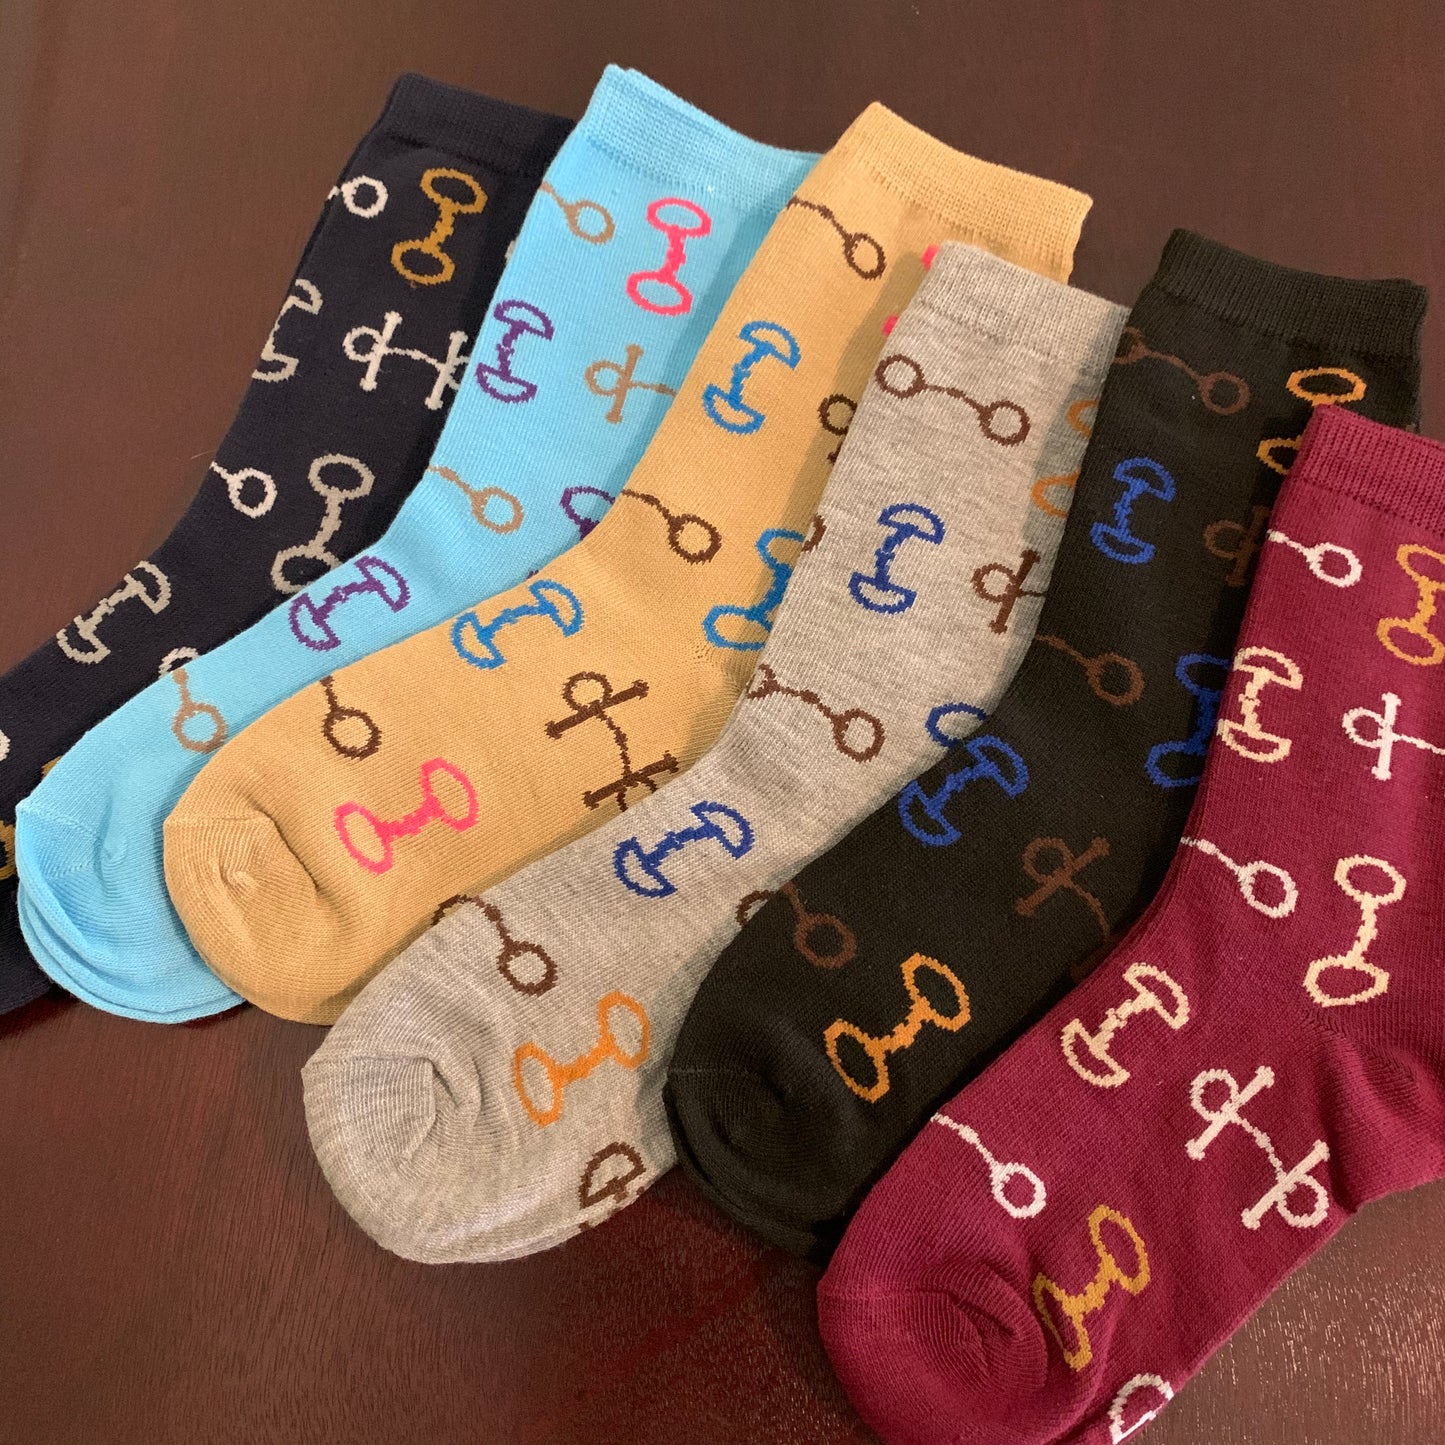 Socks in Maroon Black Grey Tan Aqua and Navy Laying Flat with Multi-Color Snaffle Bits in White Brown Gold Blue and Pink